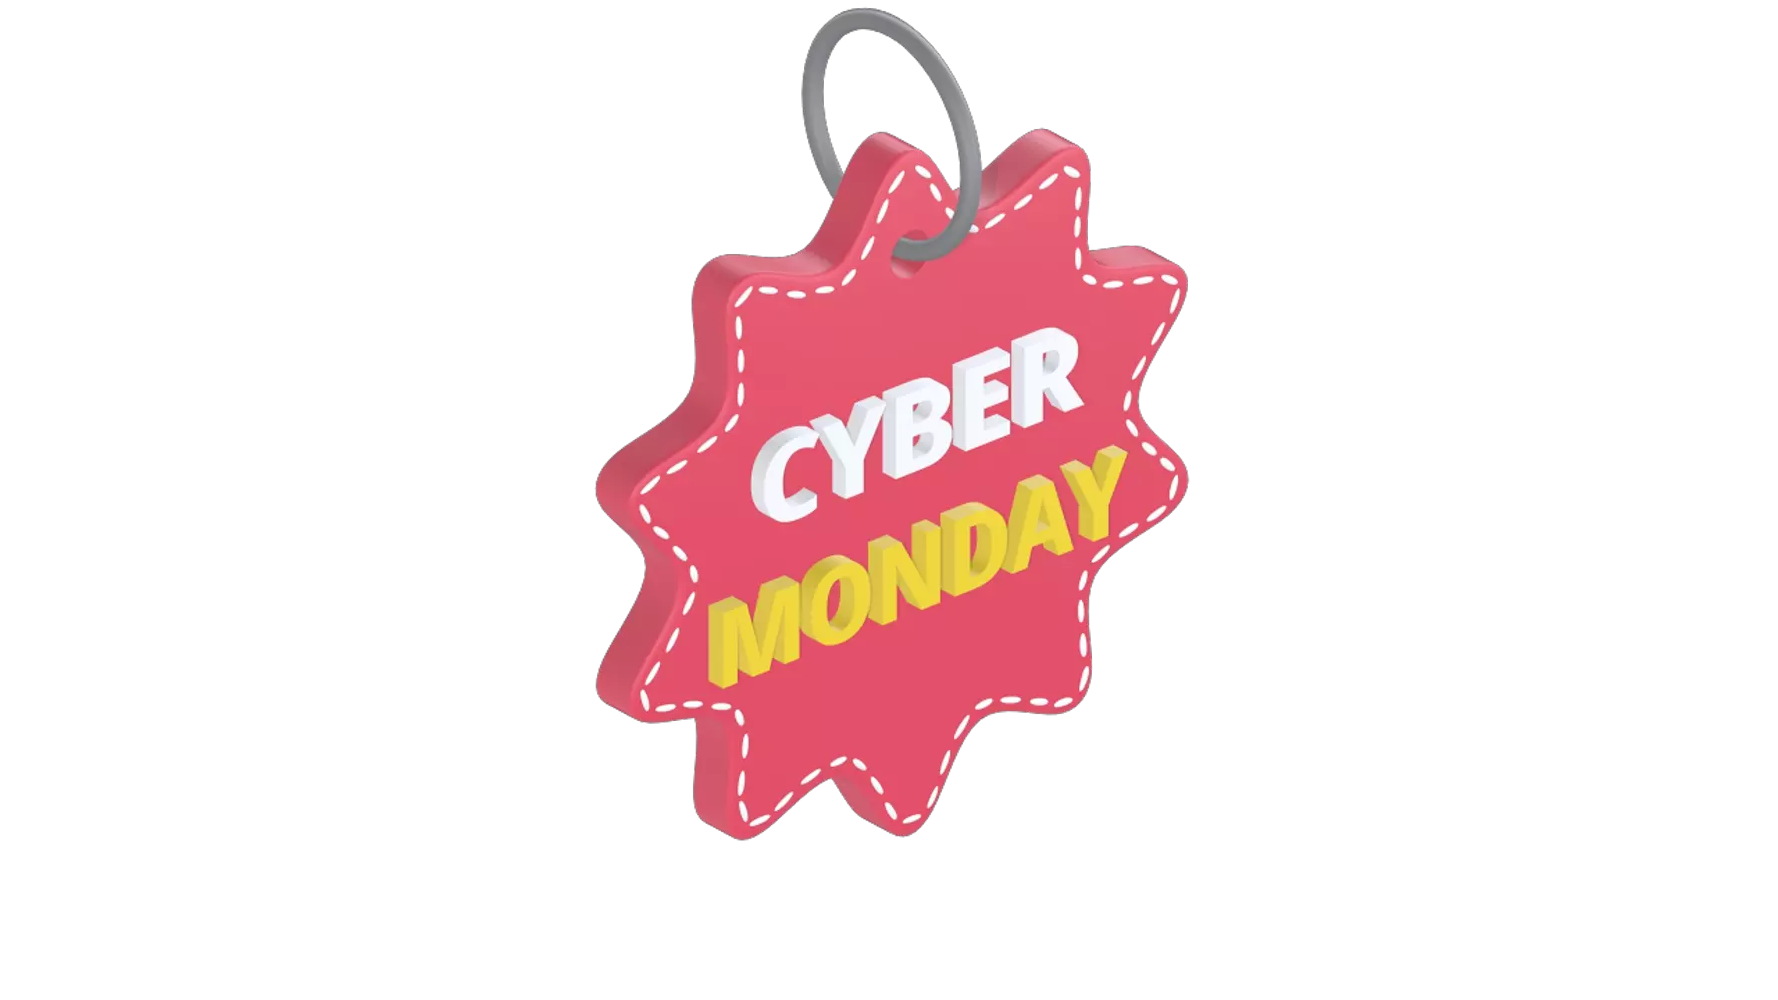 Cyber Monday 3D Graphic